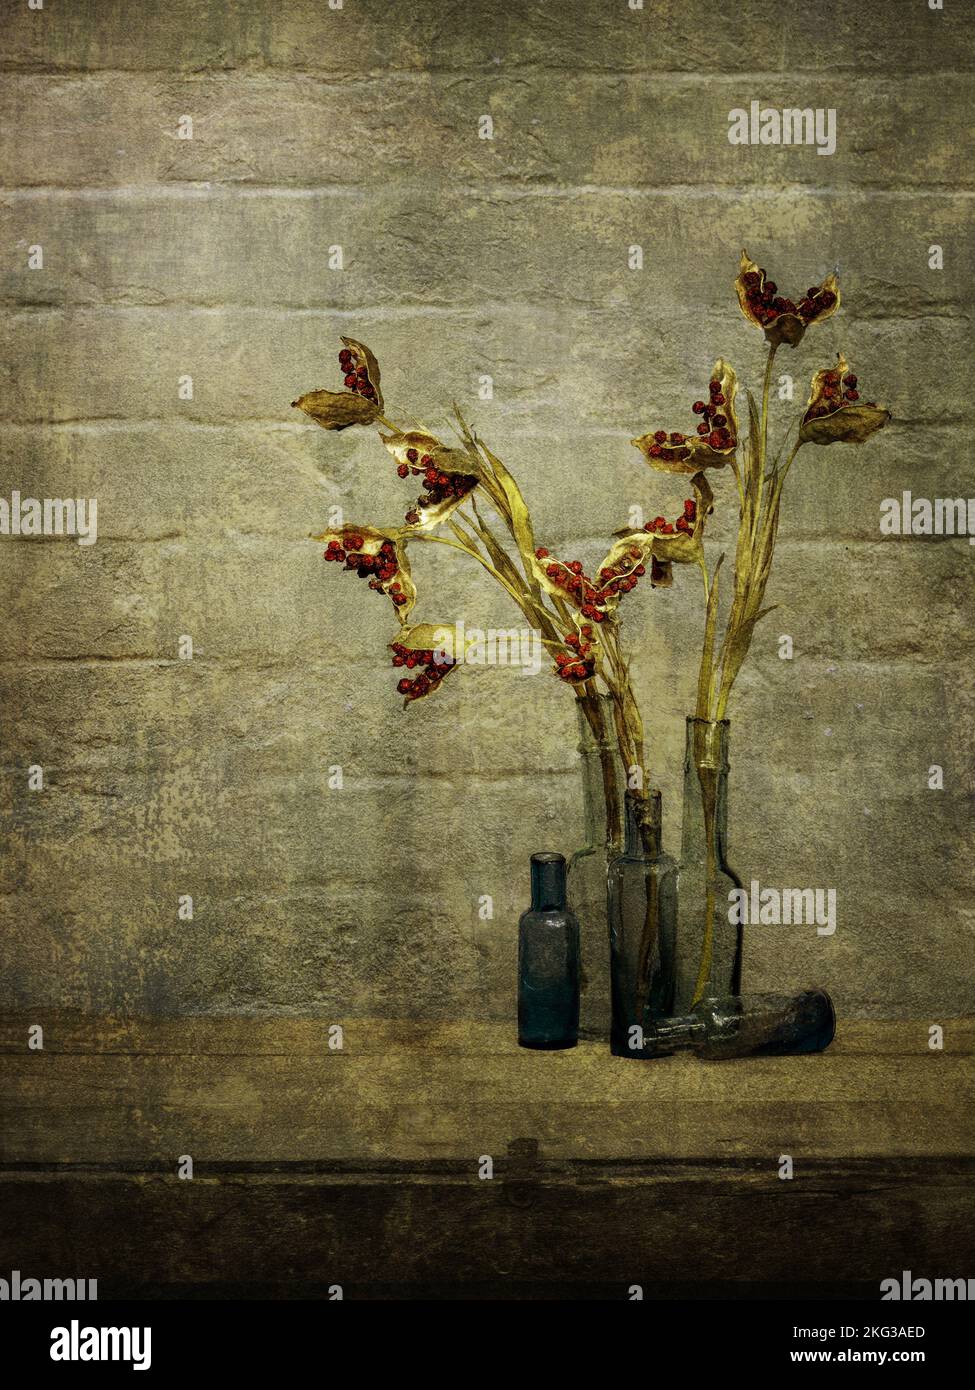 Wabi sabi still life with old bottles and dried stinking iris seed heads. Rustic interior. Stock Photo